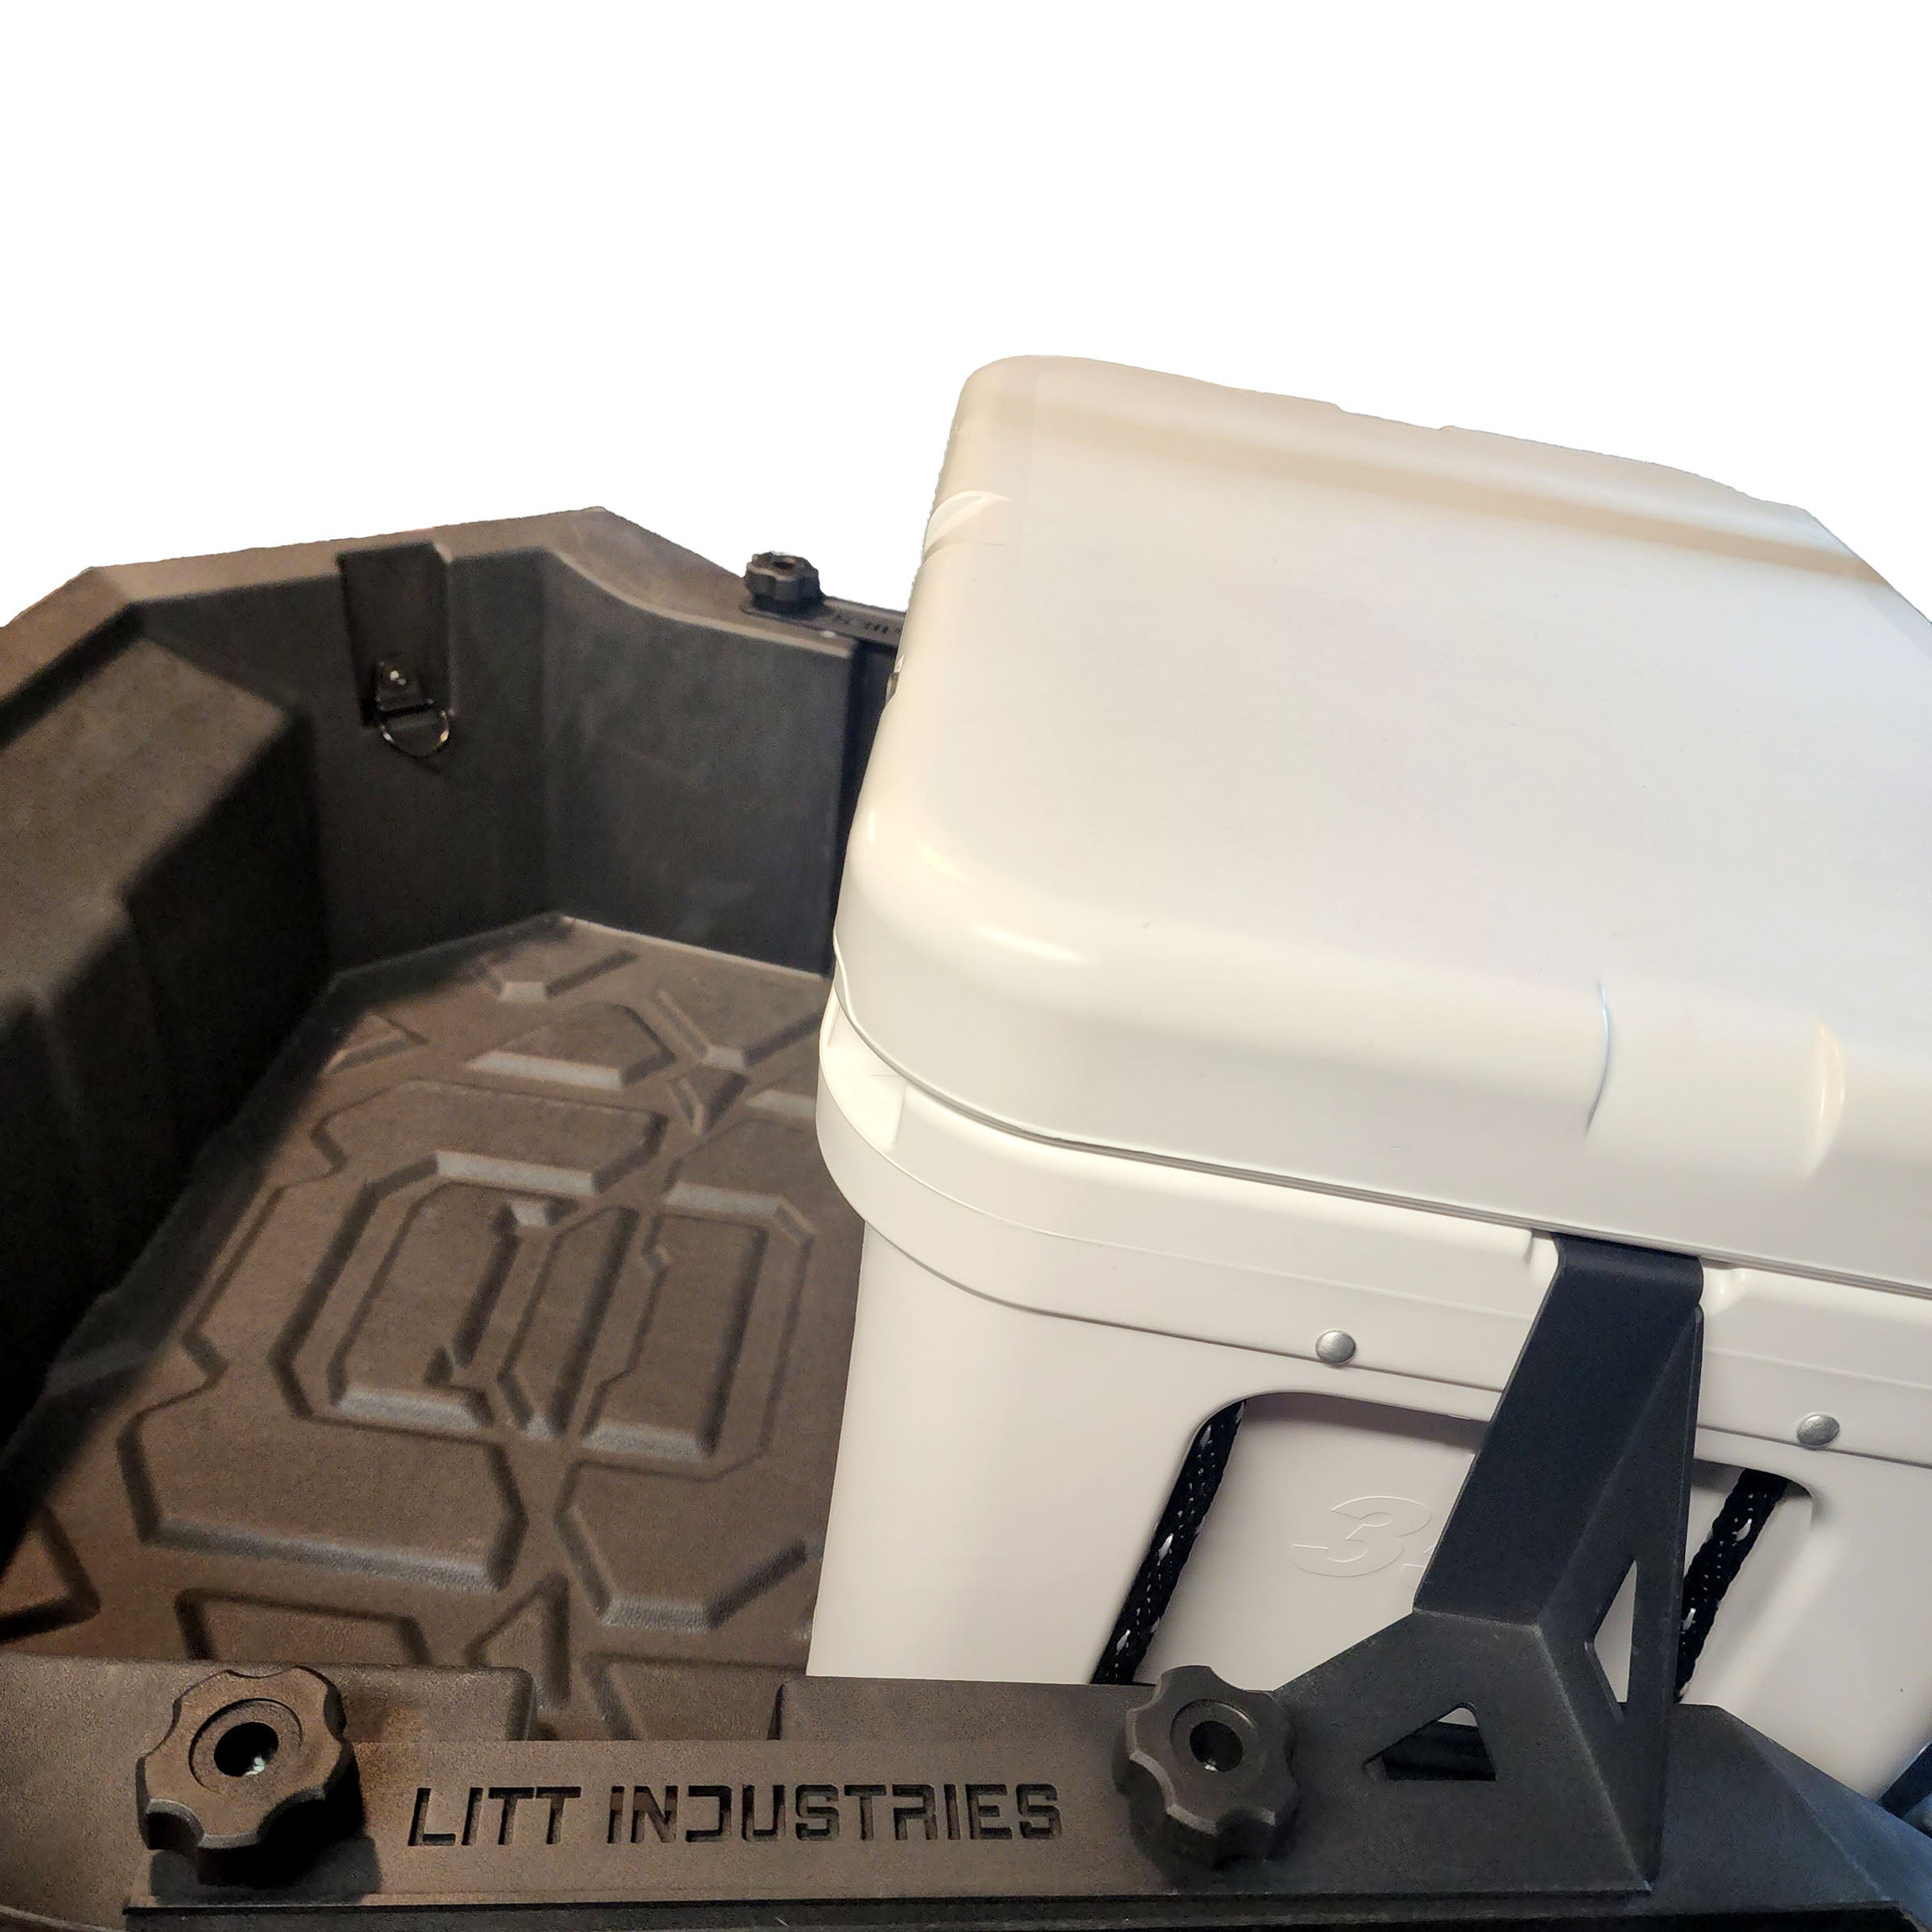 Litt Industries Yeti 35qt Cooler Mount for Polaris RZR PRO R Brackets to hold your cooler in place